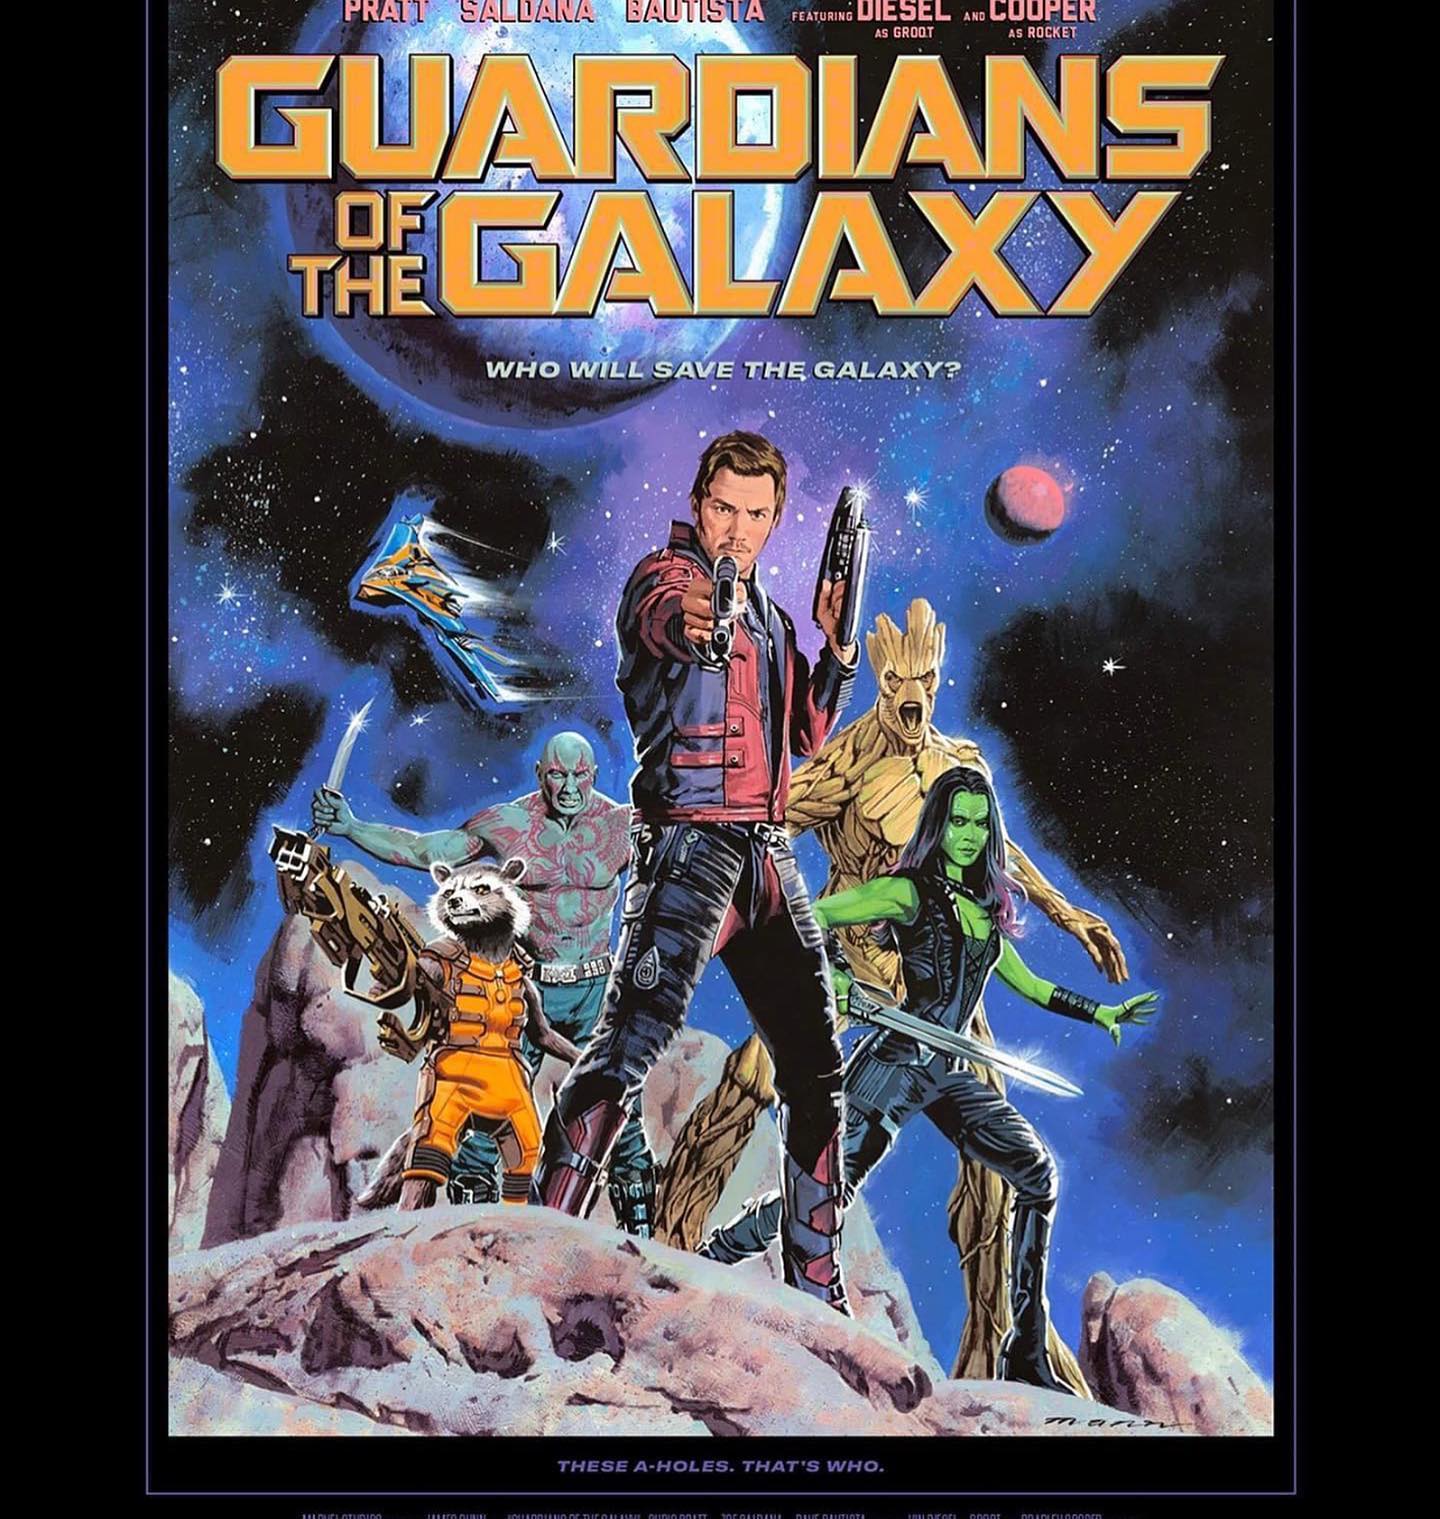 GUARDIANS OF THE GALAXY (2014)